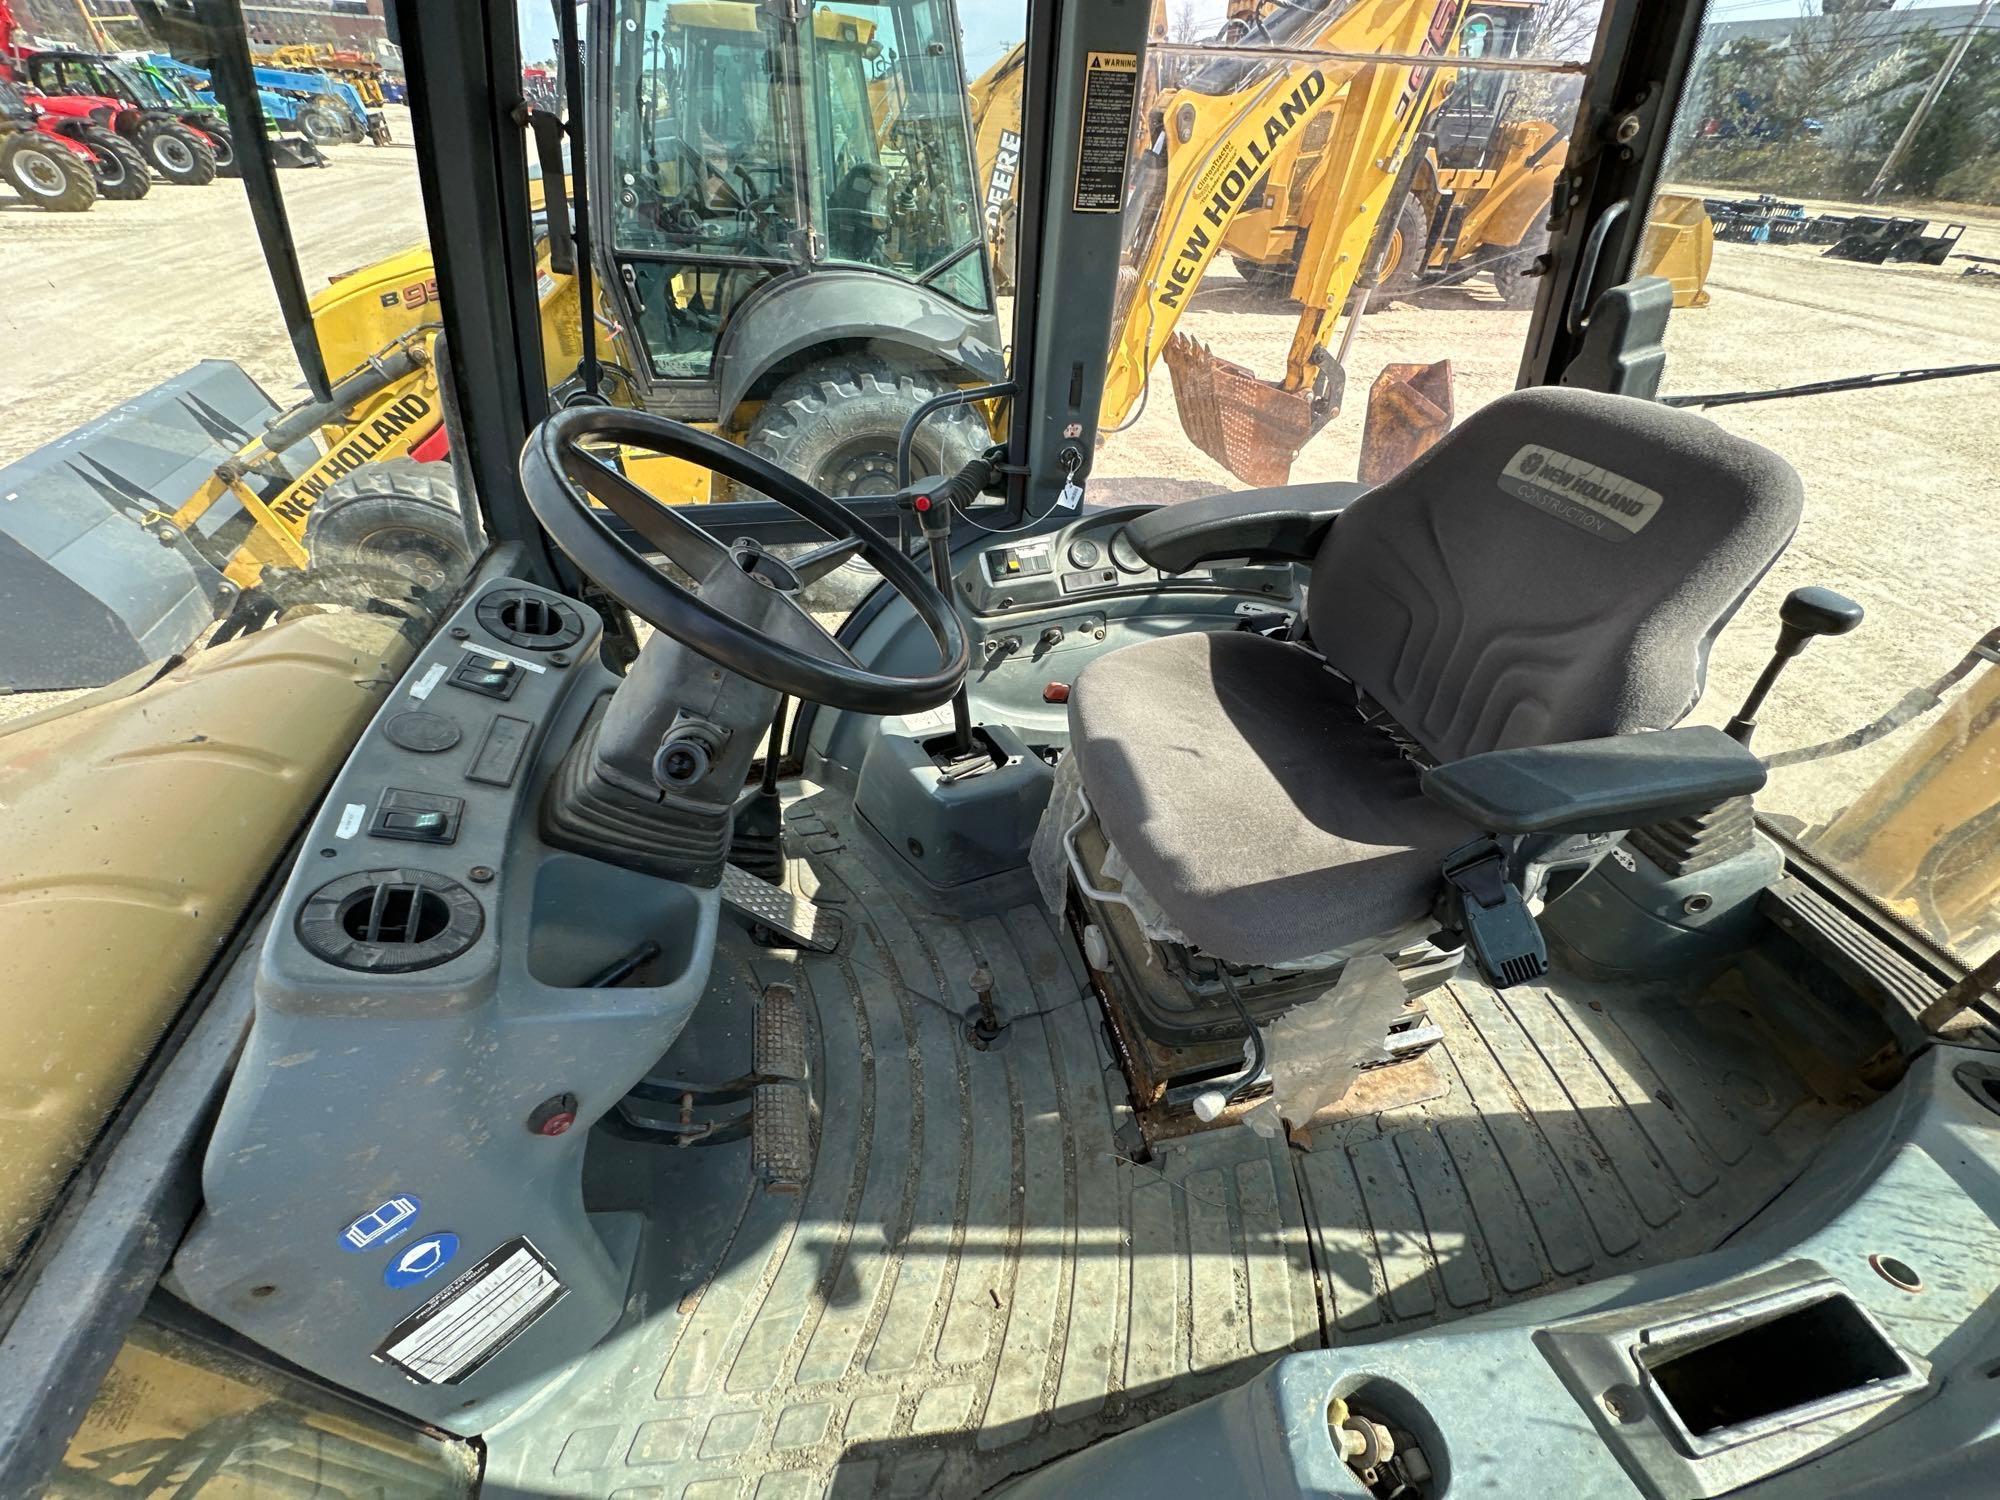 NEW HOLLAND 555E TRACTOR LOADER BACKHOE SN:31002410 powered by diesel engine, equipped with OROPS,